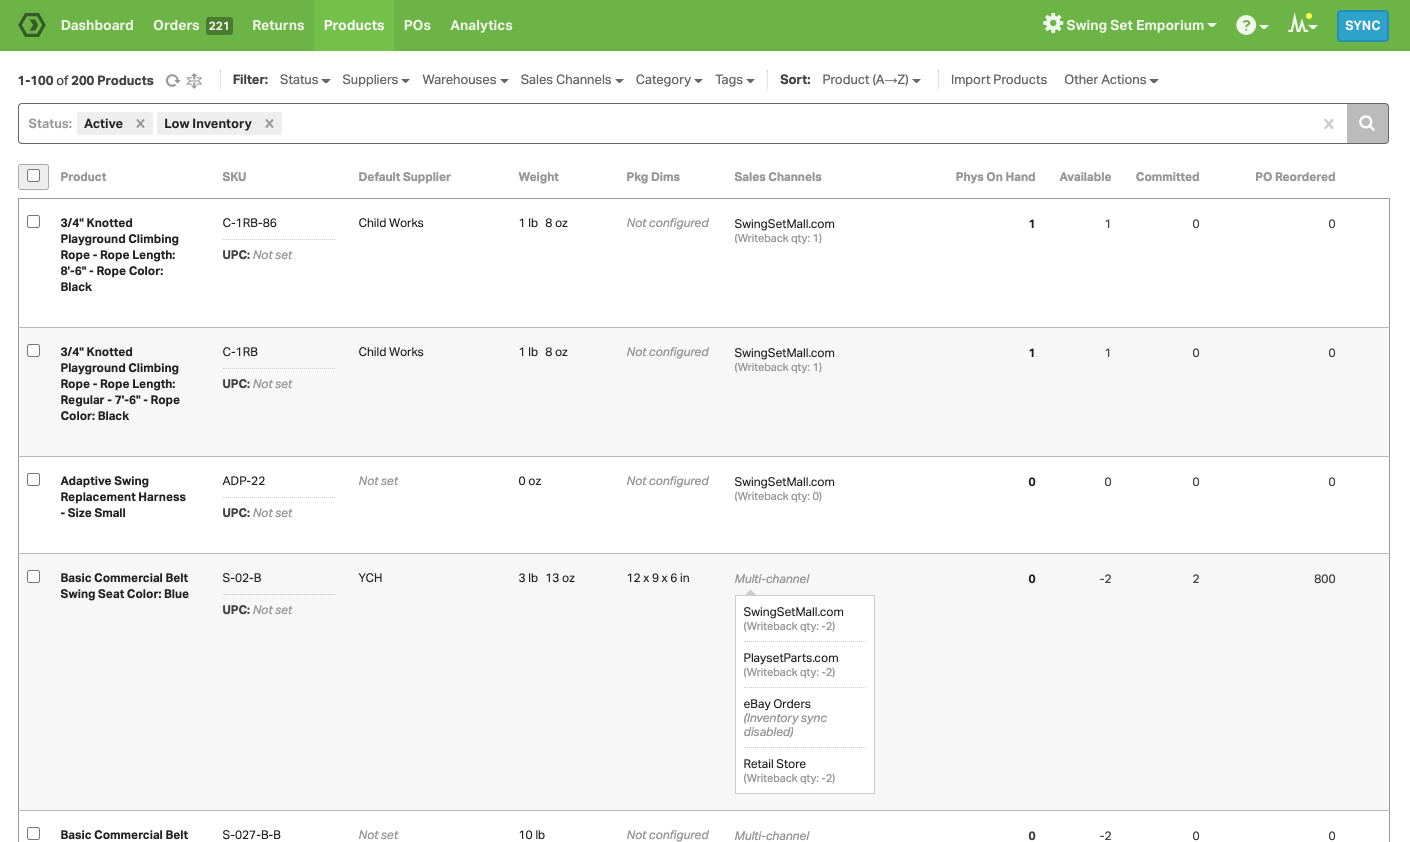 Manage all of your inventory (across ALL of your sales channels) on the Products page